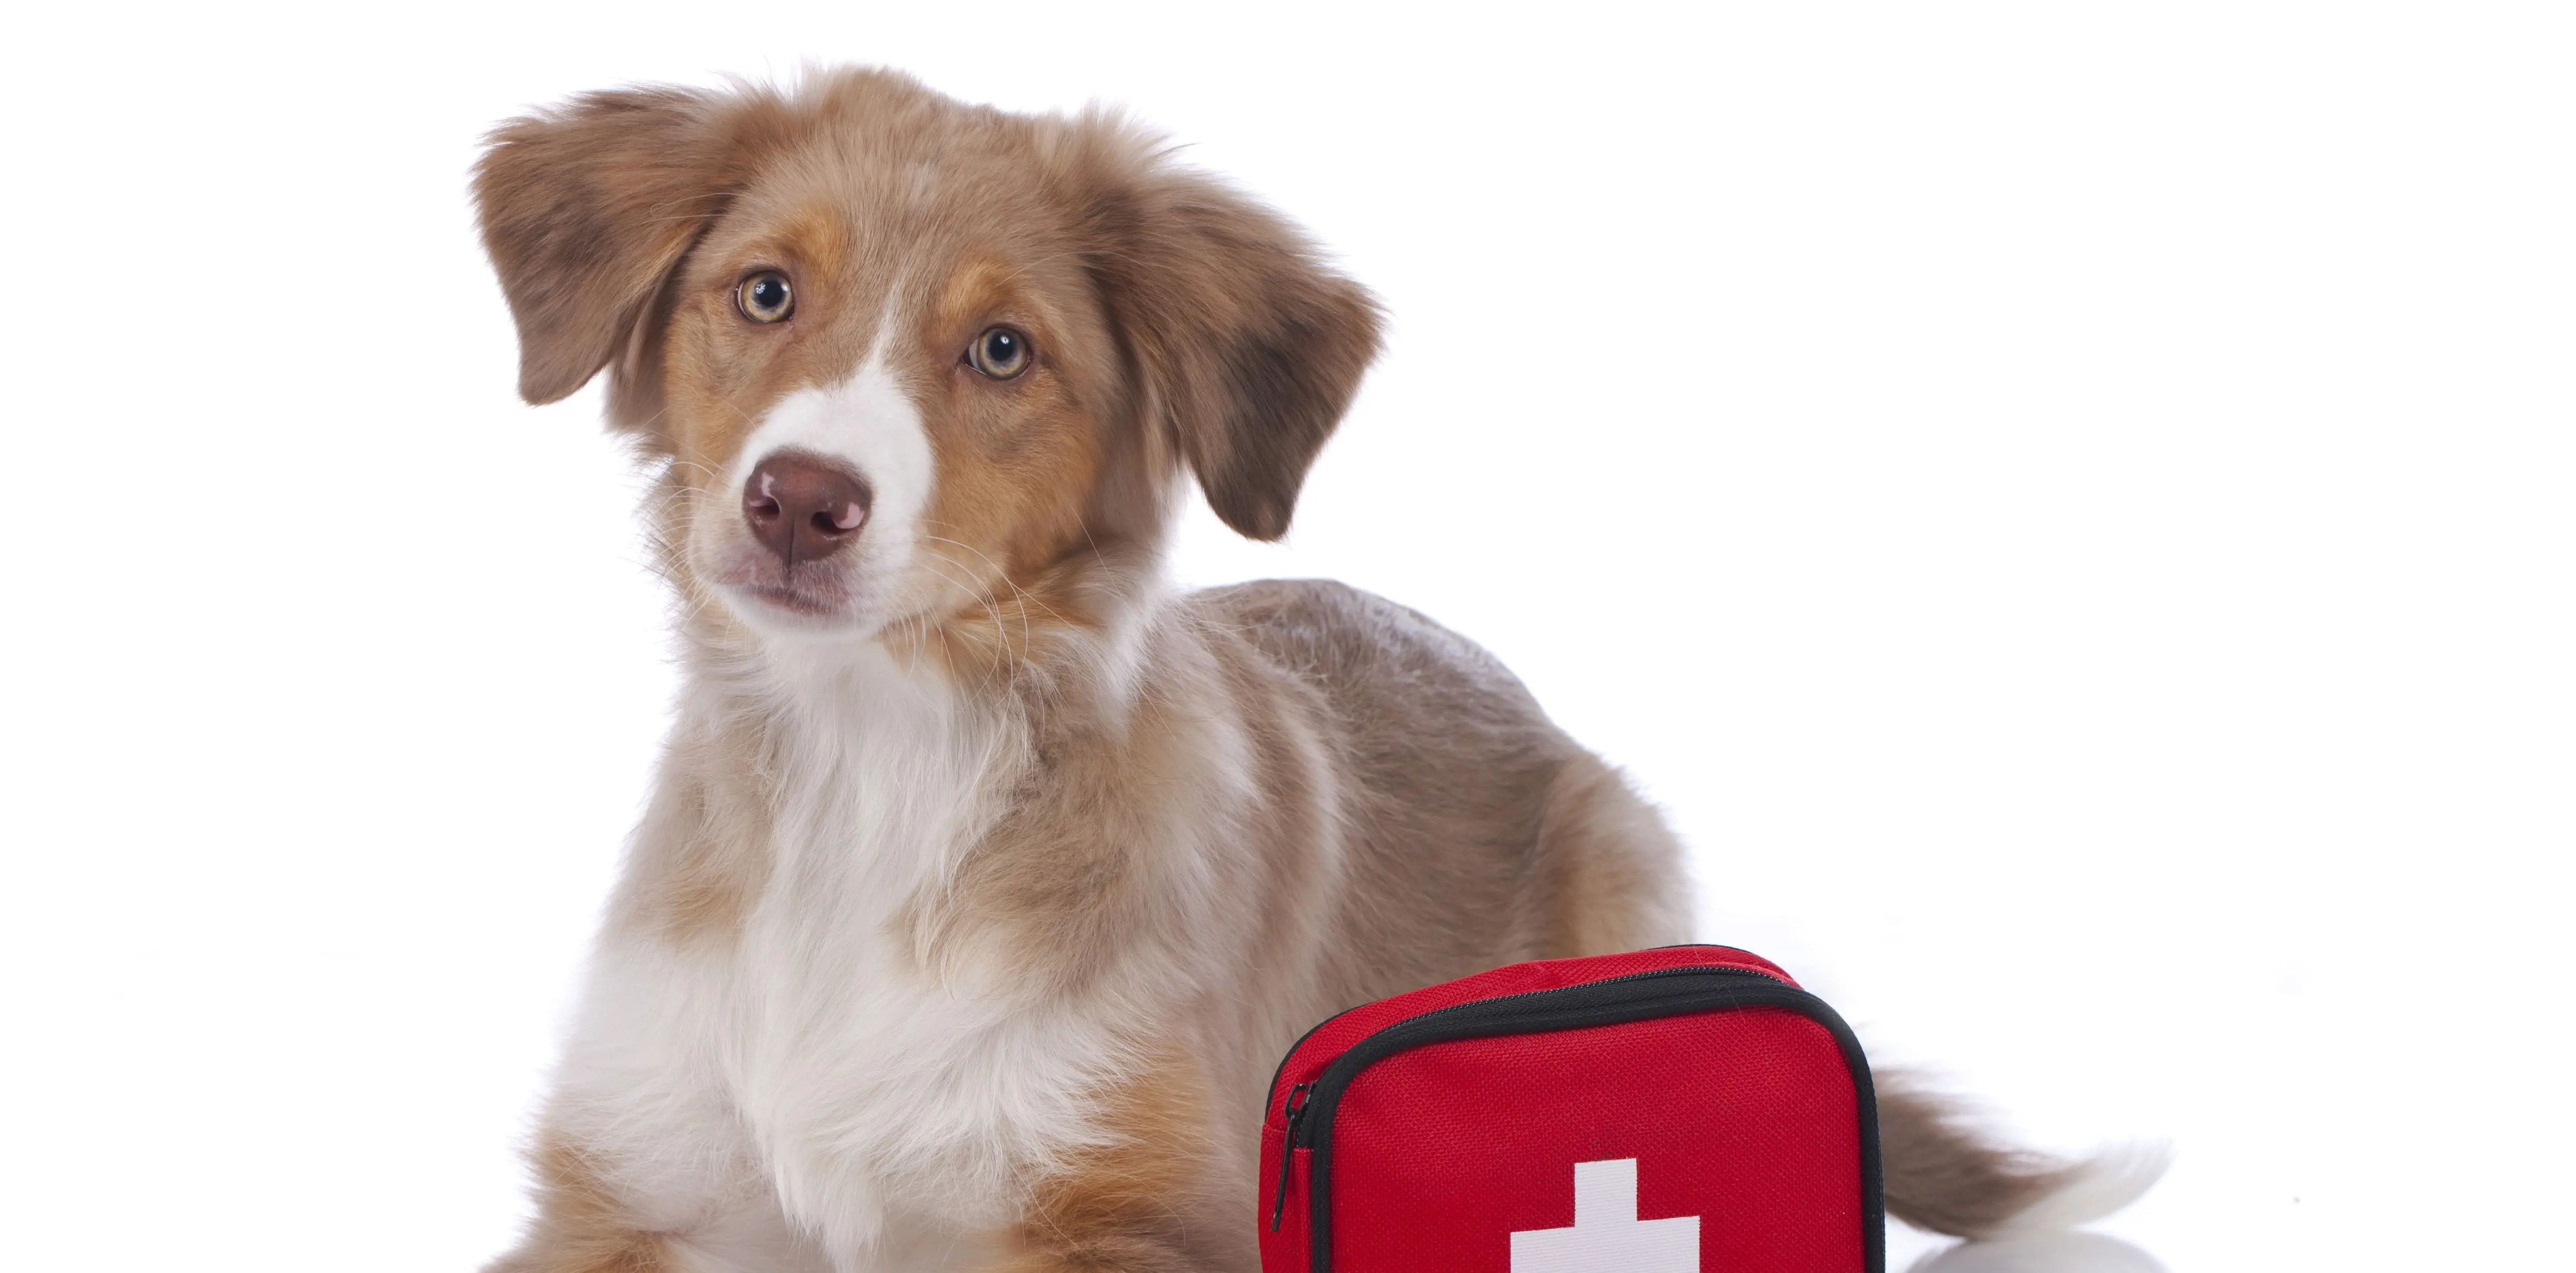 Dog with first aid